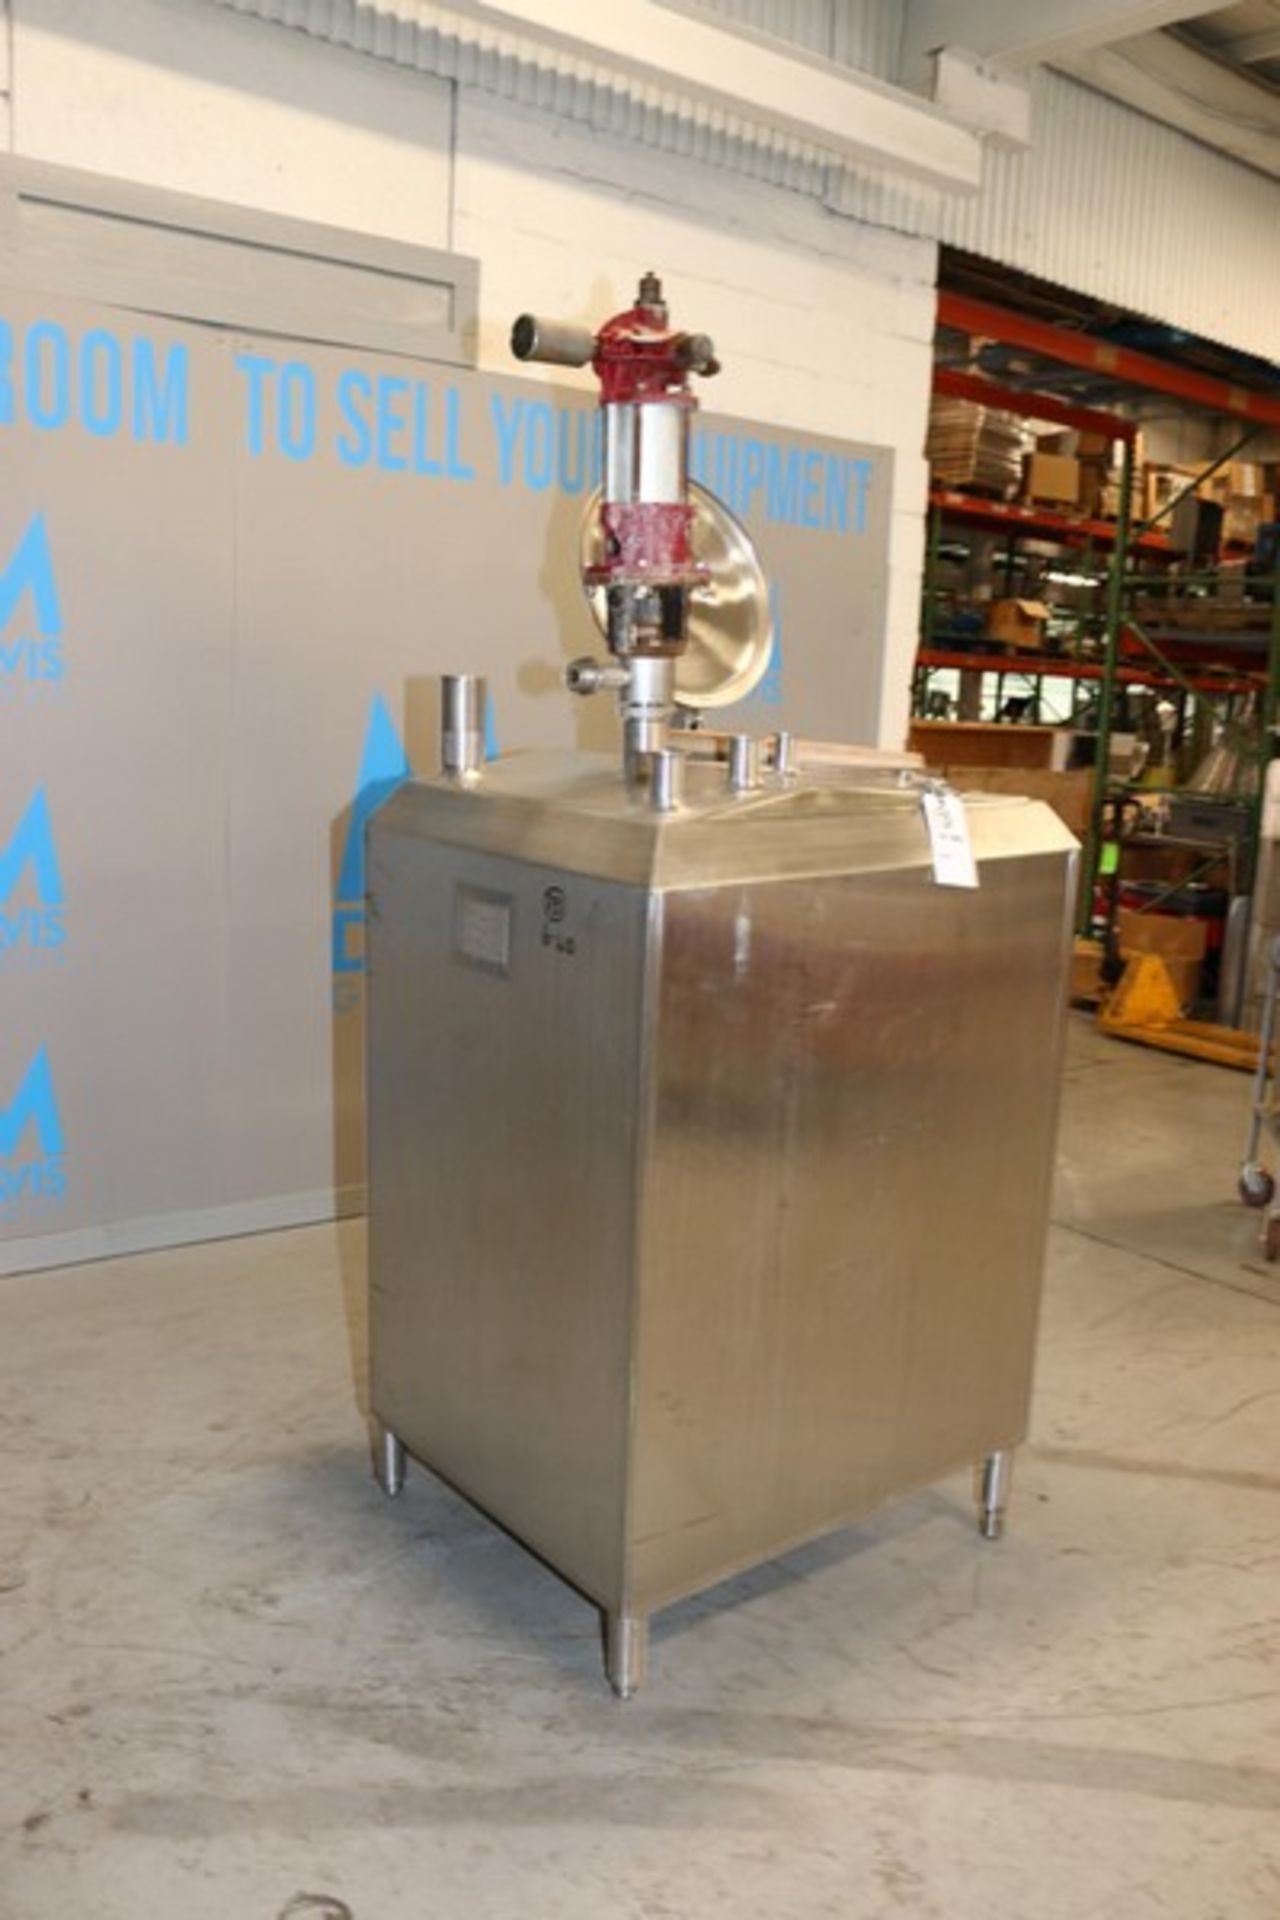 Feldmeier Aprox. 180 Gals. S/S Vertical Jacketed Tank, Rectangular Design, S/N F-582-93, with Top - Image 3 of 12